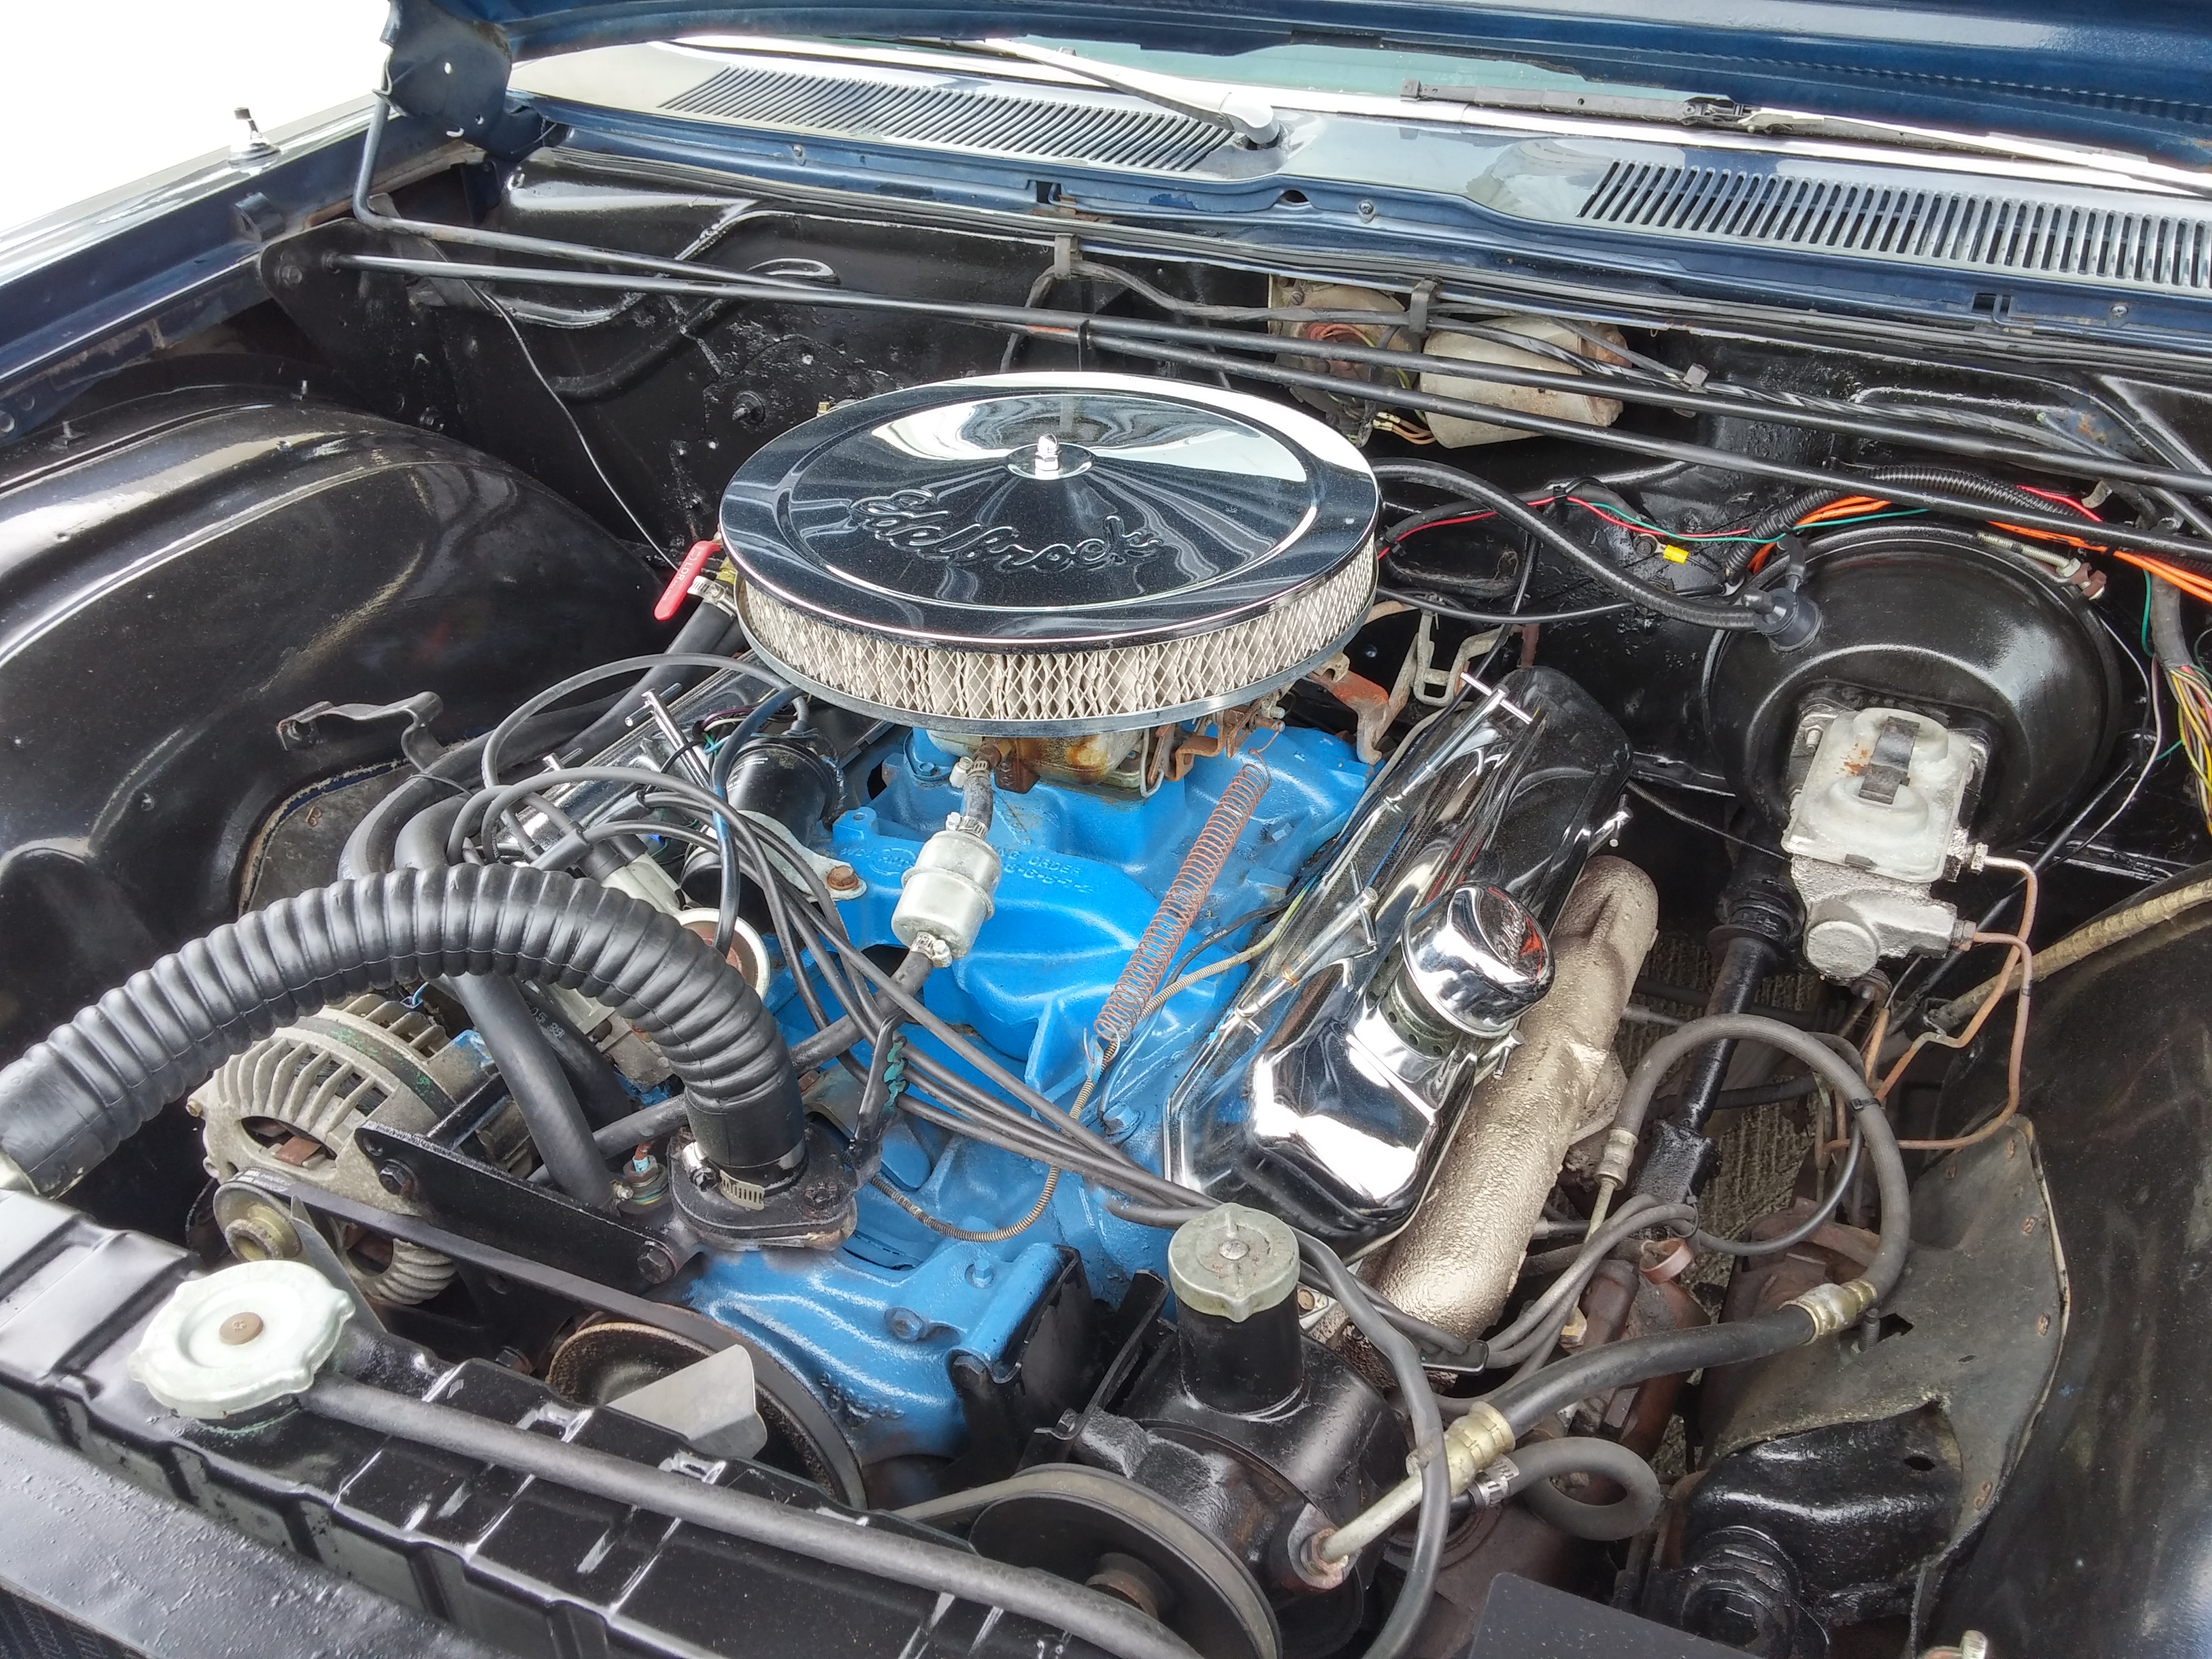 4th Image of a 1967 CHRYSLER 773